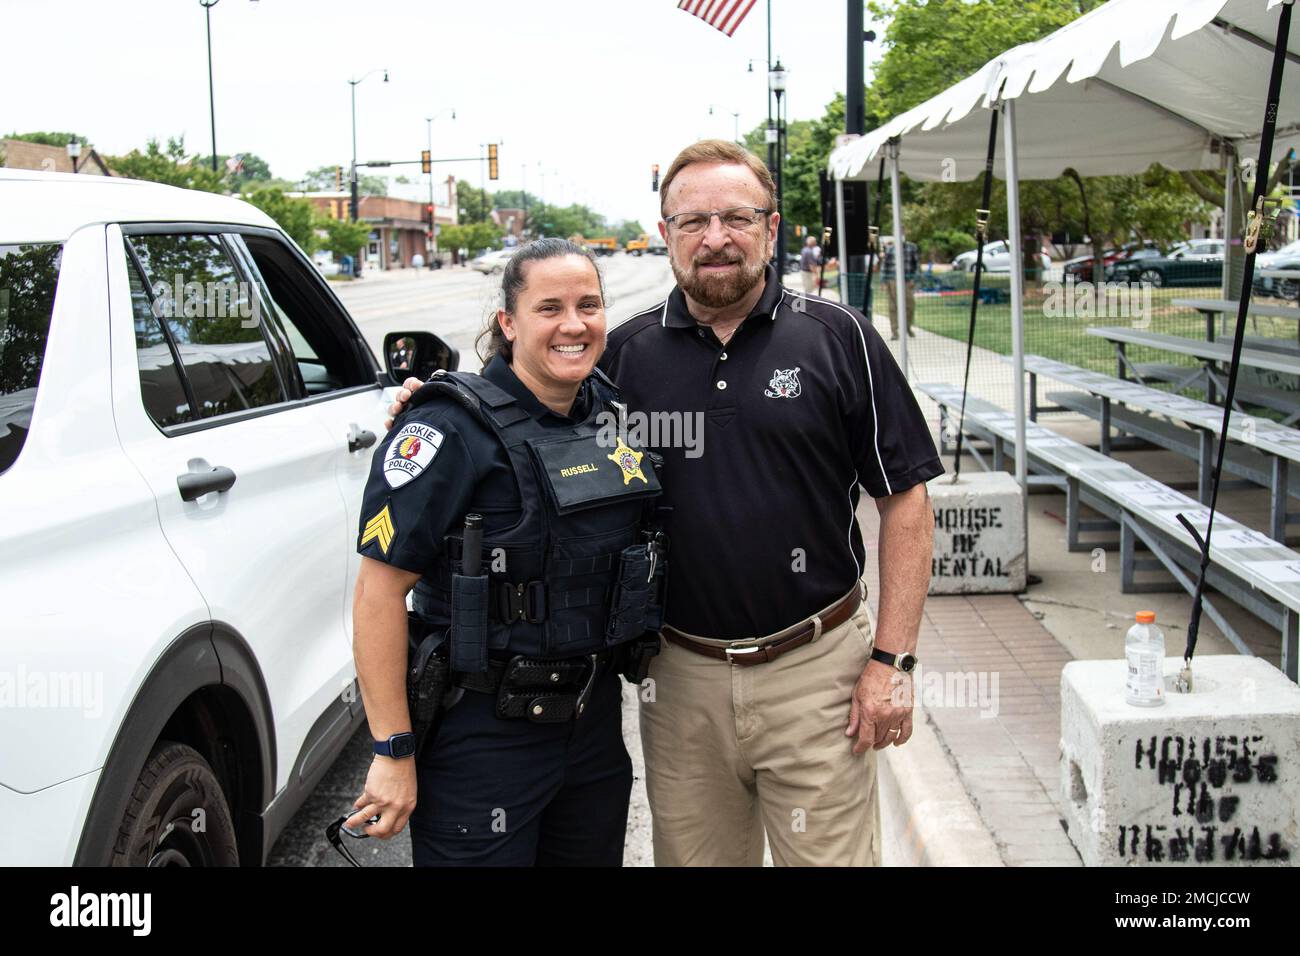 Skokie (Illinois) Police Sgt. Melissa Russell stands with Wayne Messmer, the celebrated National Anthem soloist for the National Hockey League's Chicago Blackhawks before the Skokie Independence Day Parade on July 4 was cancelled due to safety concerns after an active shooter incident in Highland Park, Illinois, about 13 miles away. The Illinois National Guard was supporting the Skokie parade with the 144th Army Band and vehicles from the 1970th Quartermaster Co. Three local Army veterans, Staff Sgt. Paul Plotnik, Mr. Gerald Jaffe, and Illinois Army National Guard Master Sgt. Hank Gould were s Stock Photo